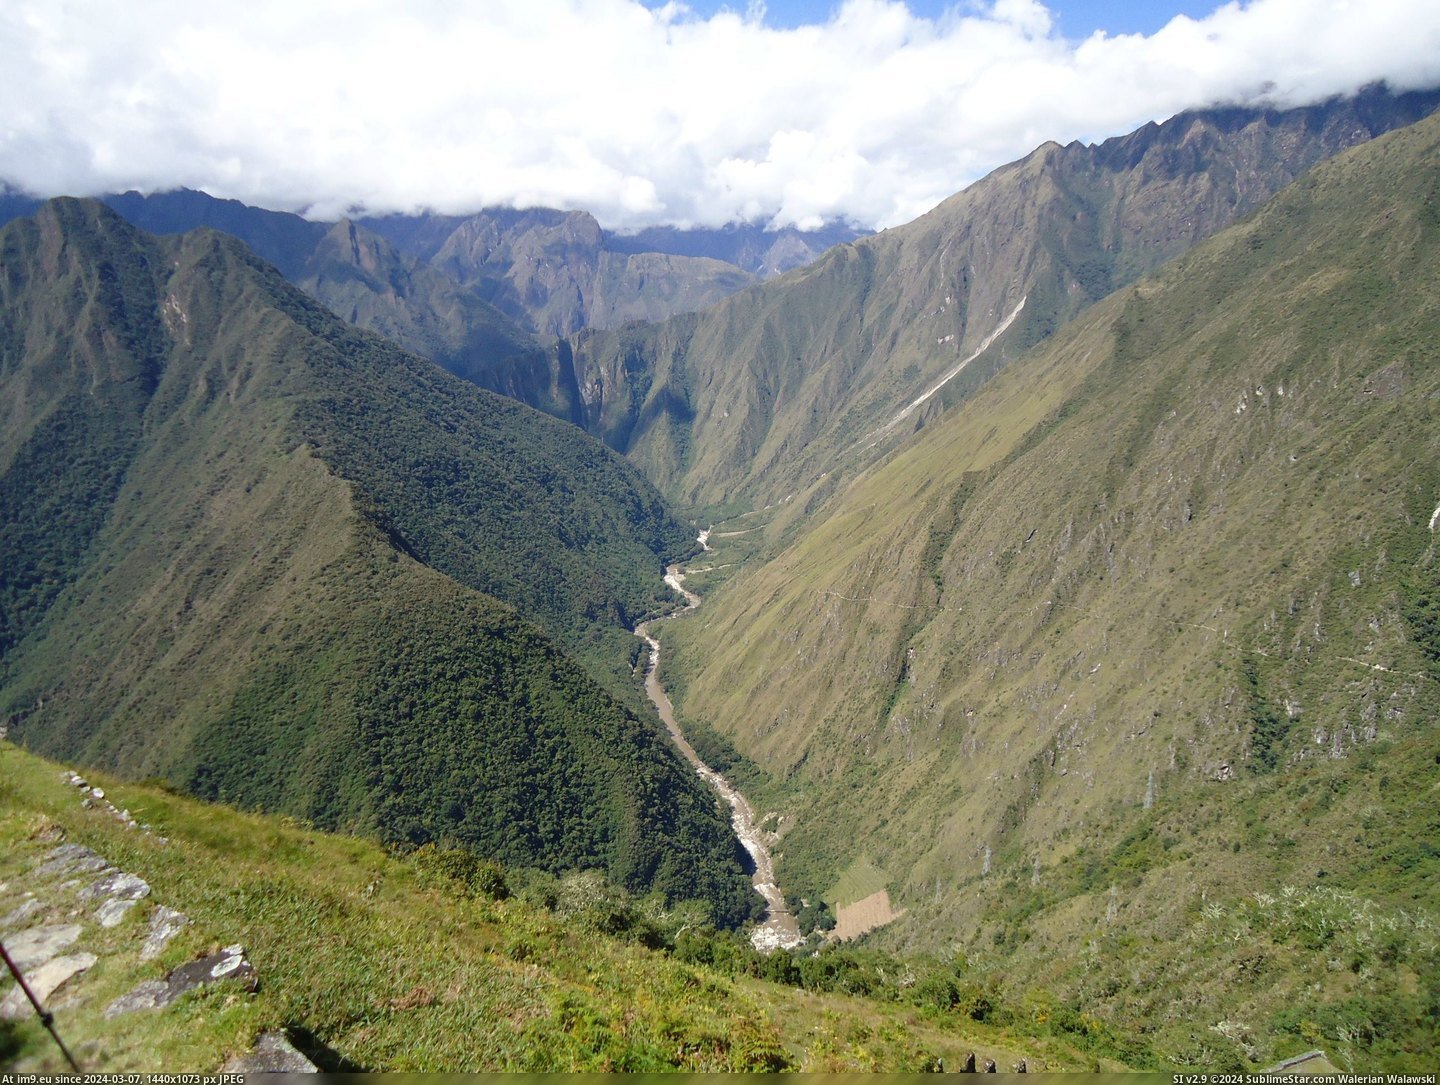 #Trail #Simply #2592x1944 #Picchu #Machu #Peru #Breathtaking #Hiked [Earthporn] I've also hiked the Inca Trail to Machu Picchu in Peru - the views are simply breathtaking [2592x1944] Pic. (Image of album My r/EARTHPORN favs))